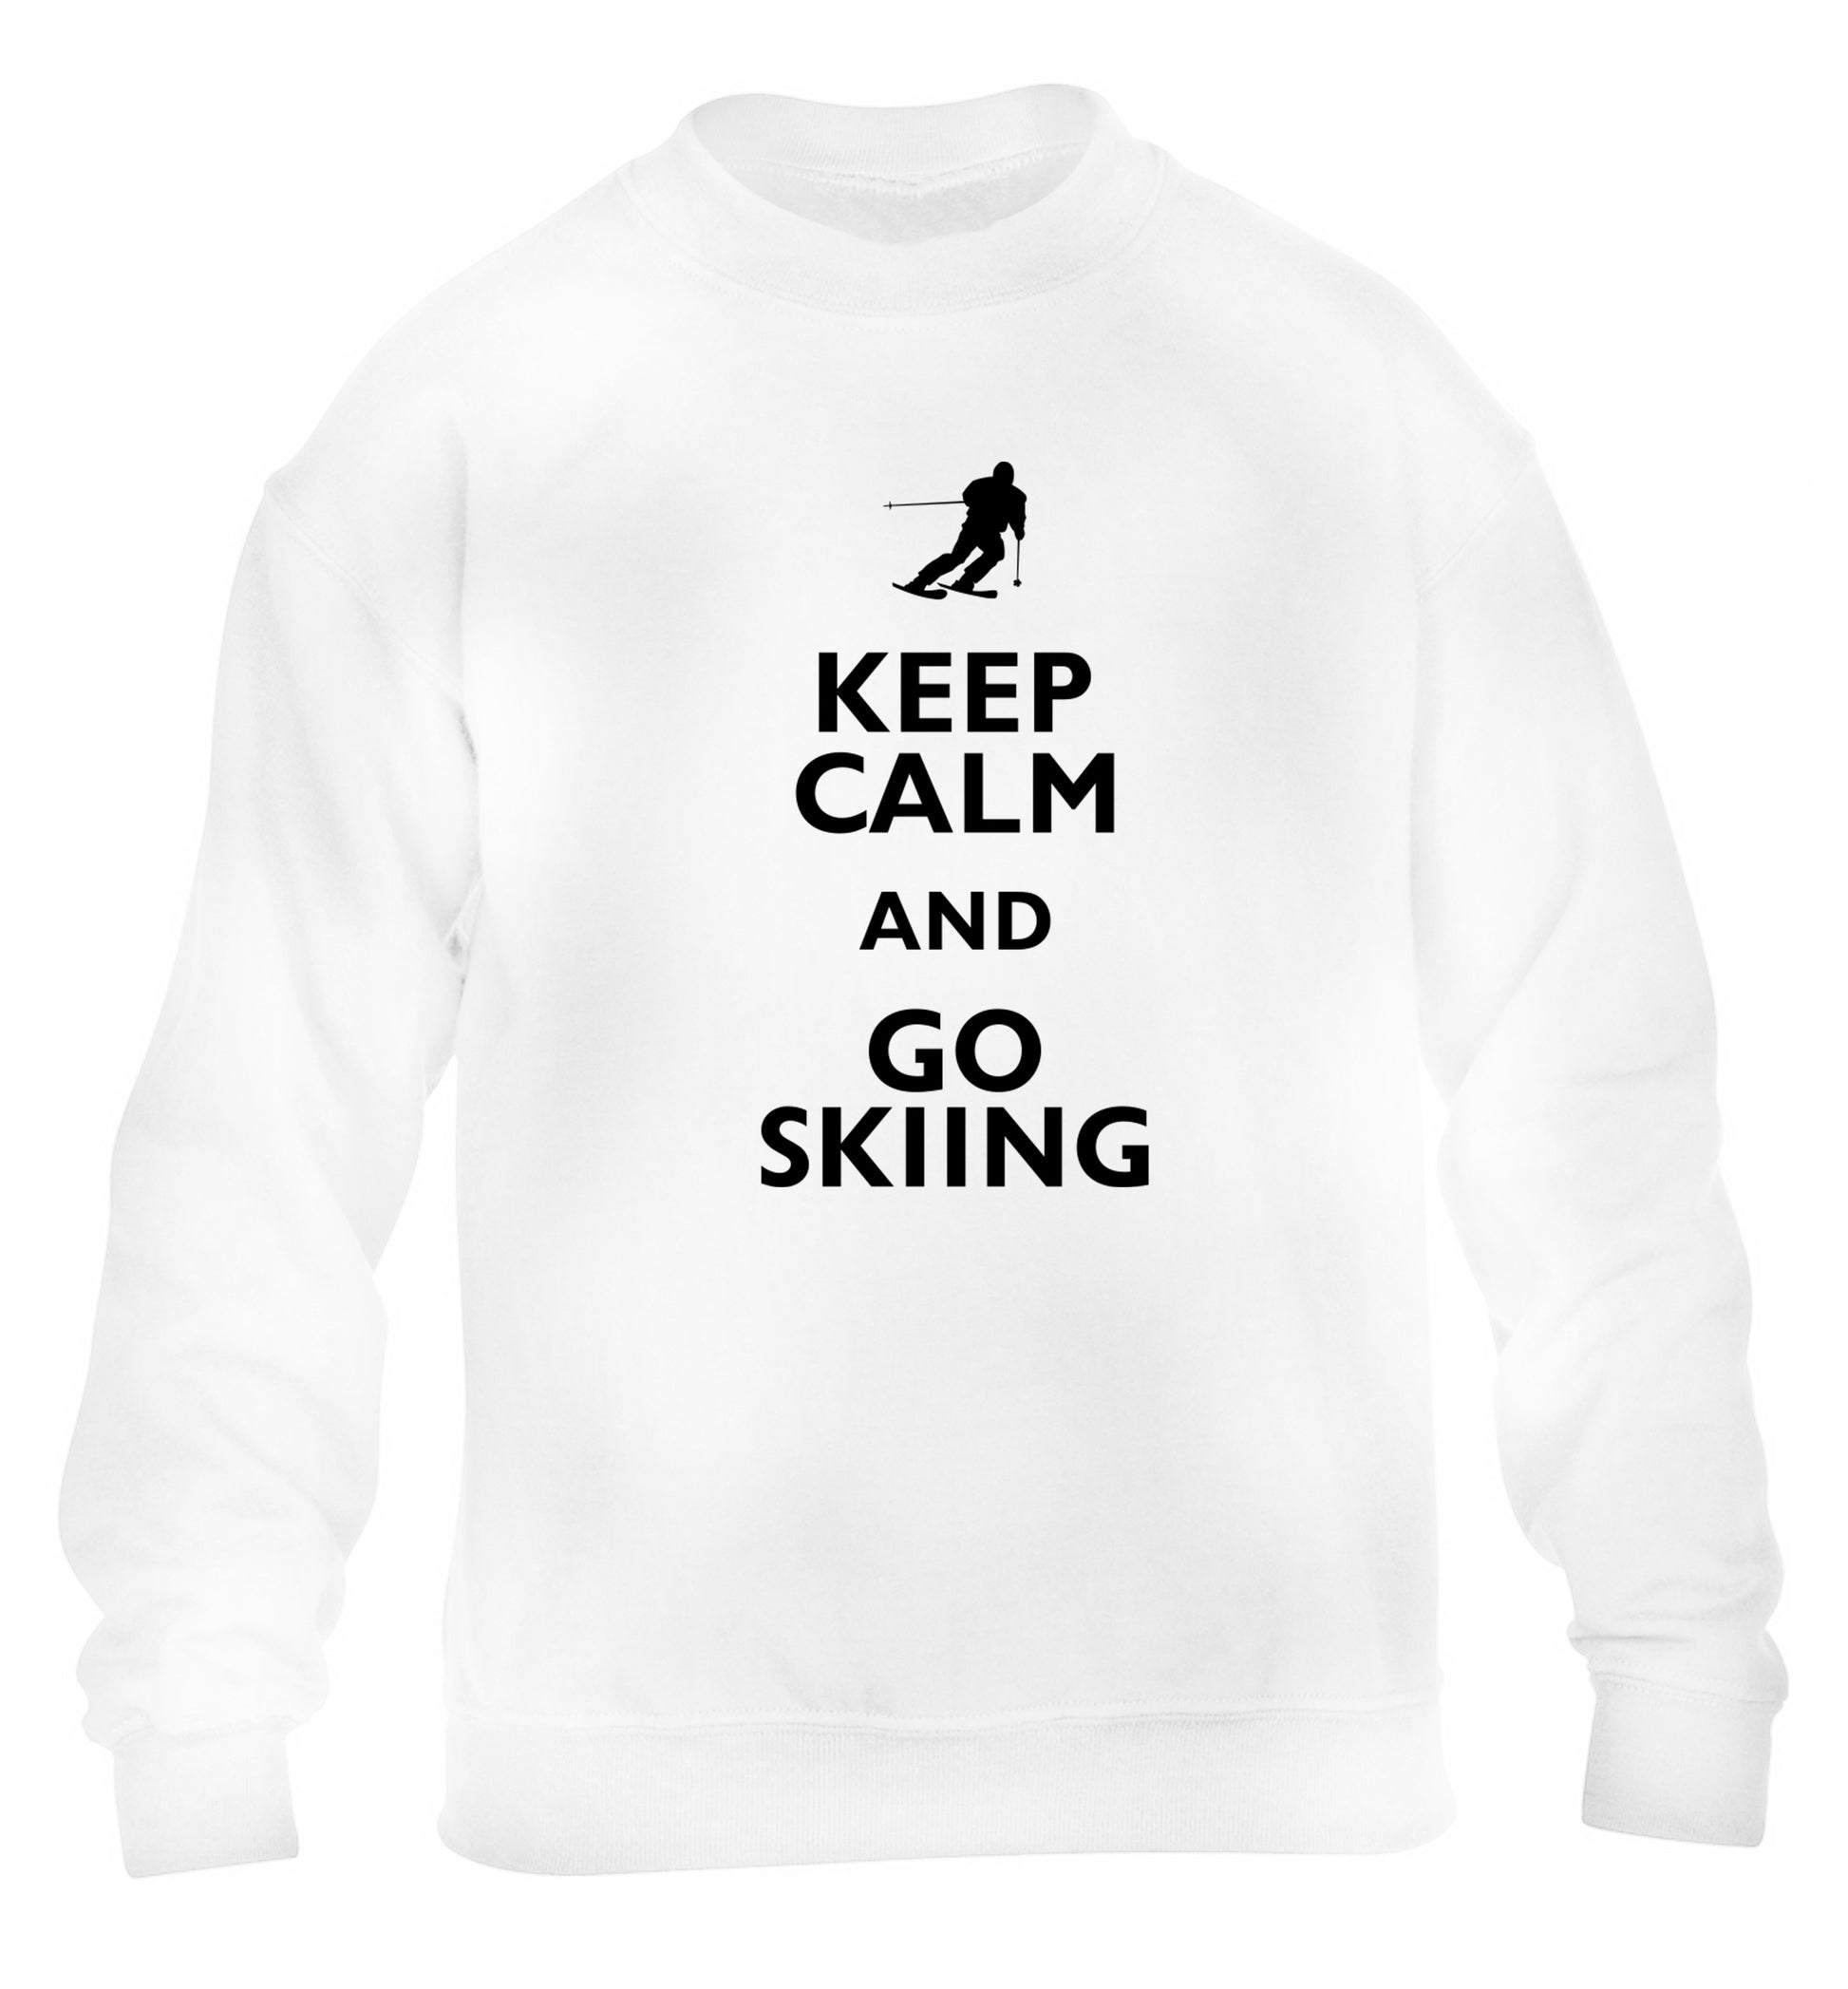 Keep calm and go skiing children's white sweater 12-14 Years